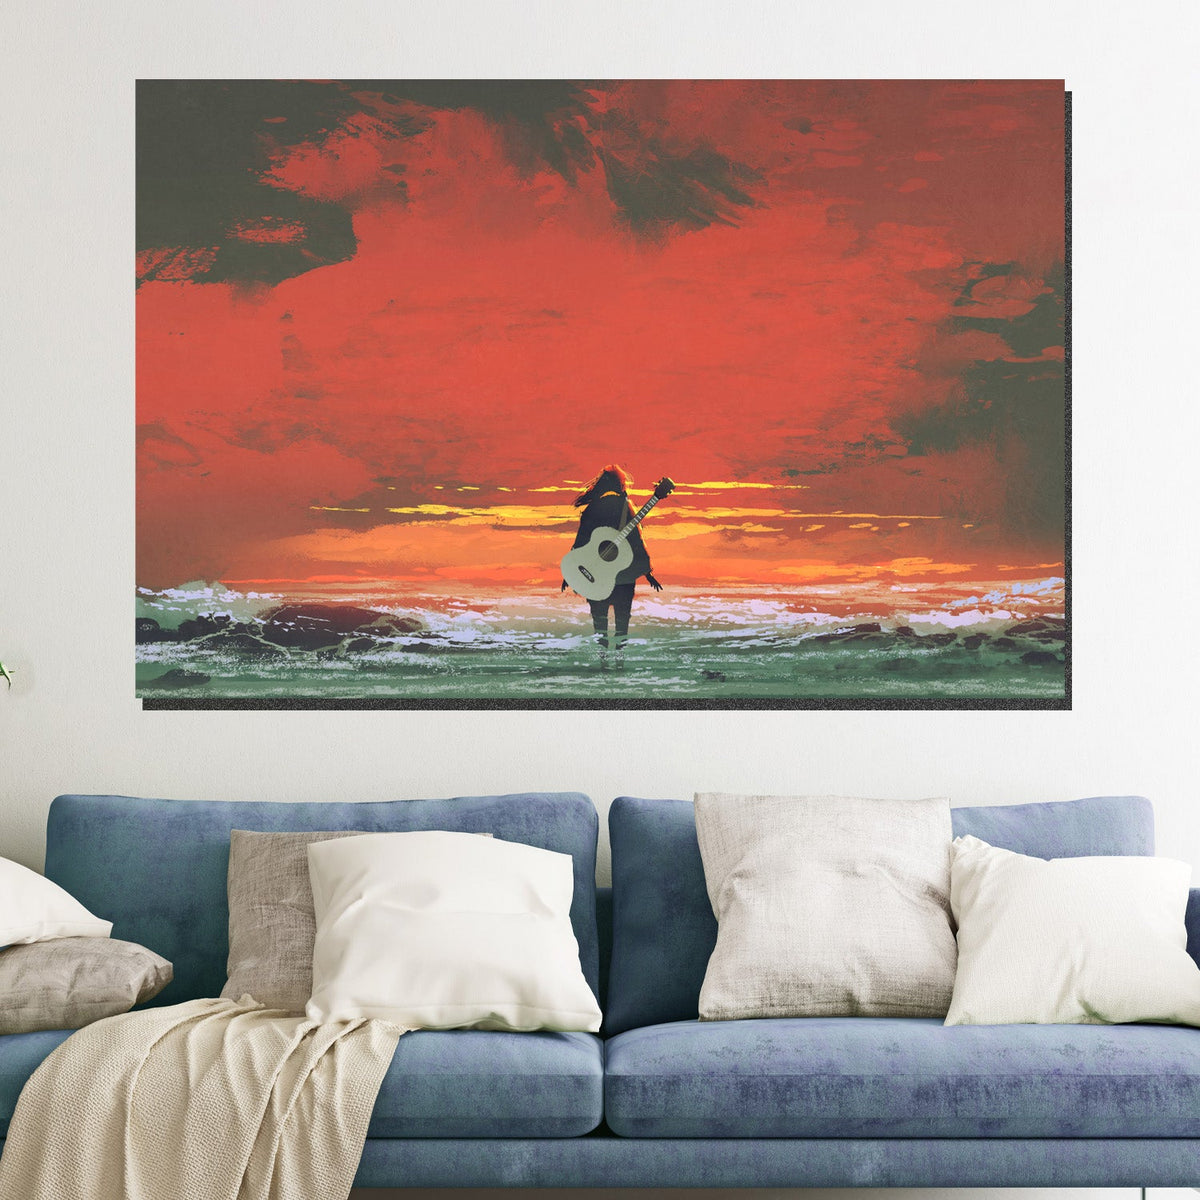 https://cdn.shopify.com/s/files/1/0387/9986/8044/products/GirlwithGuitarCanvasPrintStretched-1.jpg